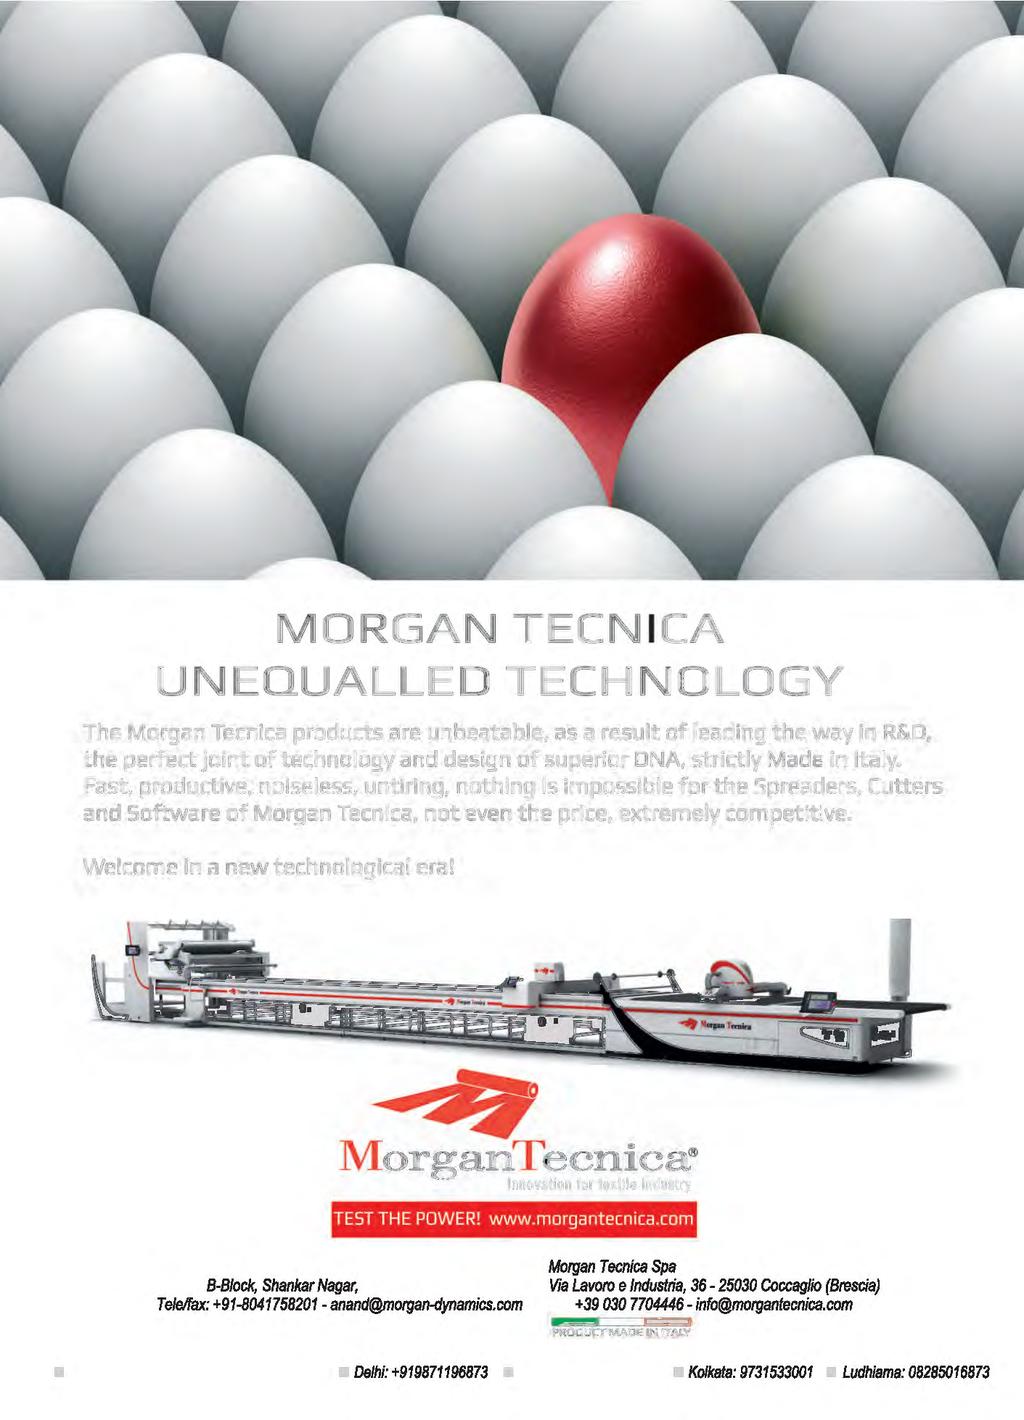 MORGAN TECNICA UNEQUALLED TECHNOLOGY The Morgan Tecnica products are unbeatable, as a result of leading the way in R&D, the perfect joint of